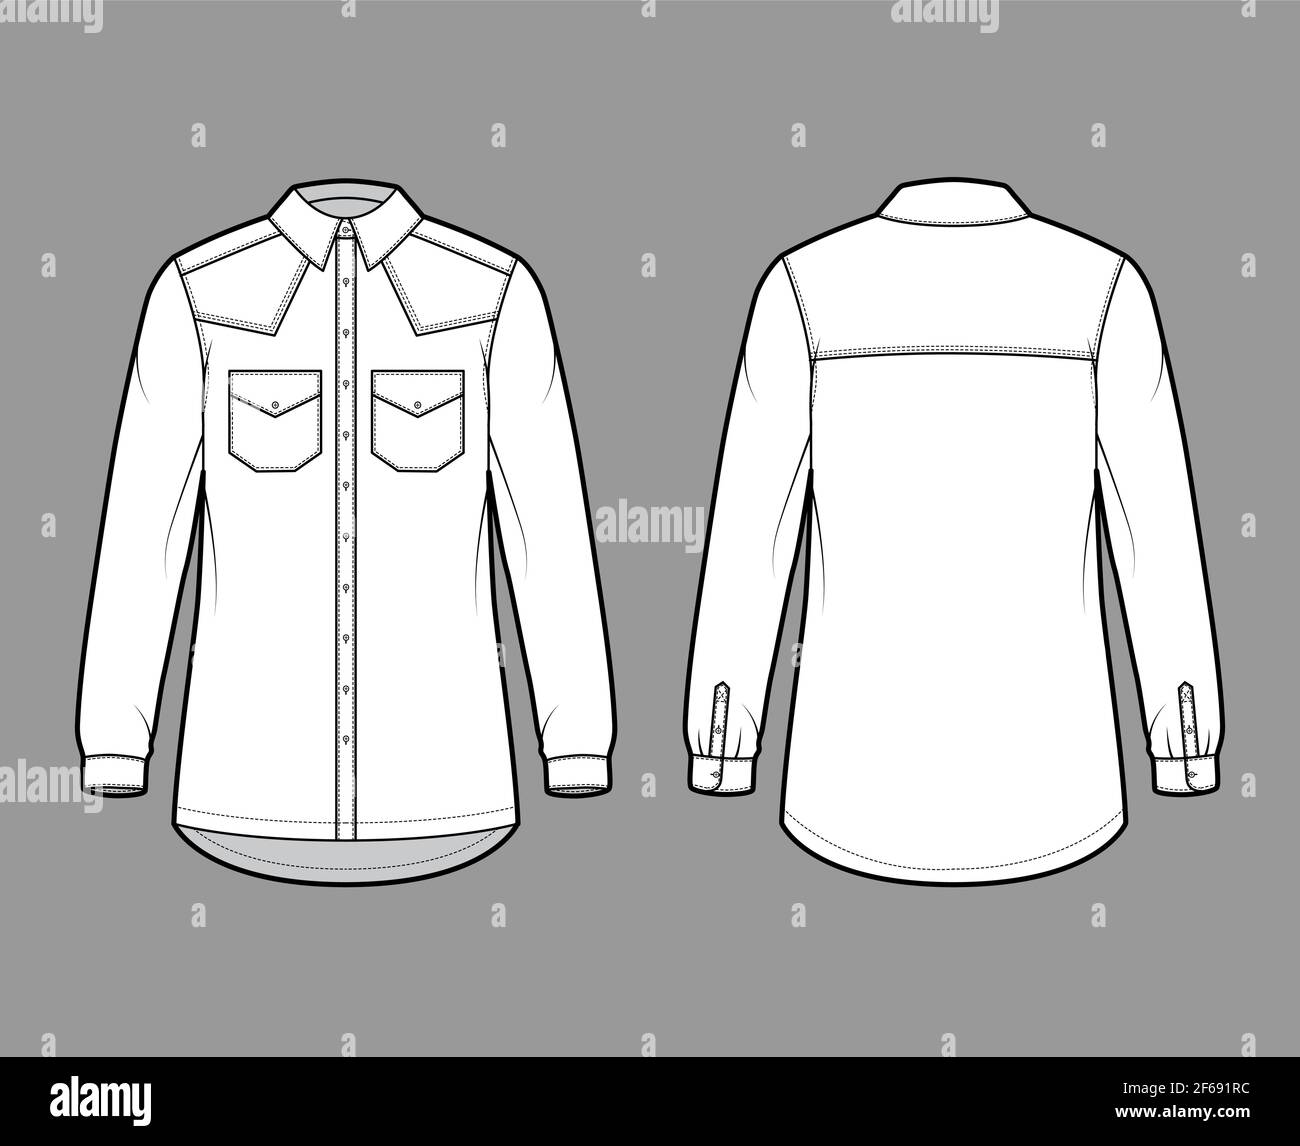 Denim shirt jacket technical fashion illustration with oversized body, flap pockets, button closure, classic collar, long sleeves. Flat apparel front, back, white color style. Women, men CAD mockup Stock Vector